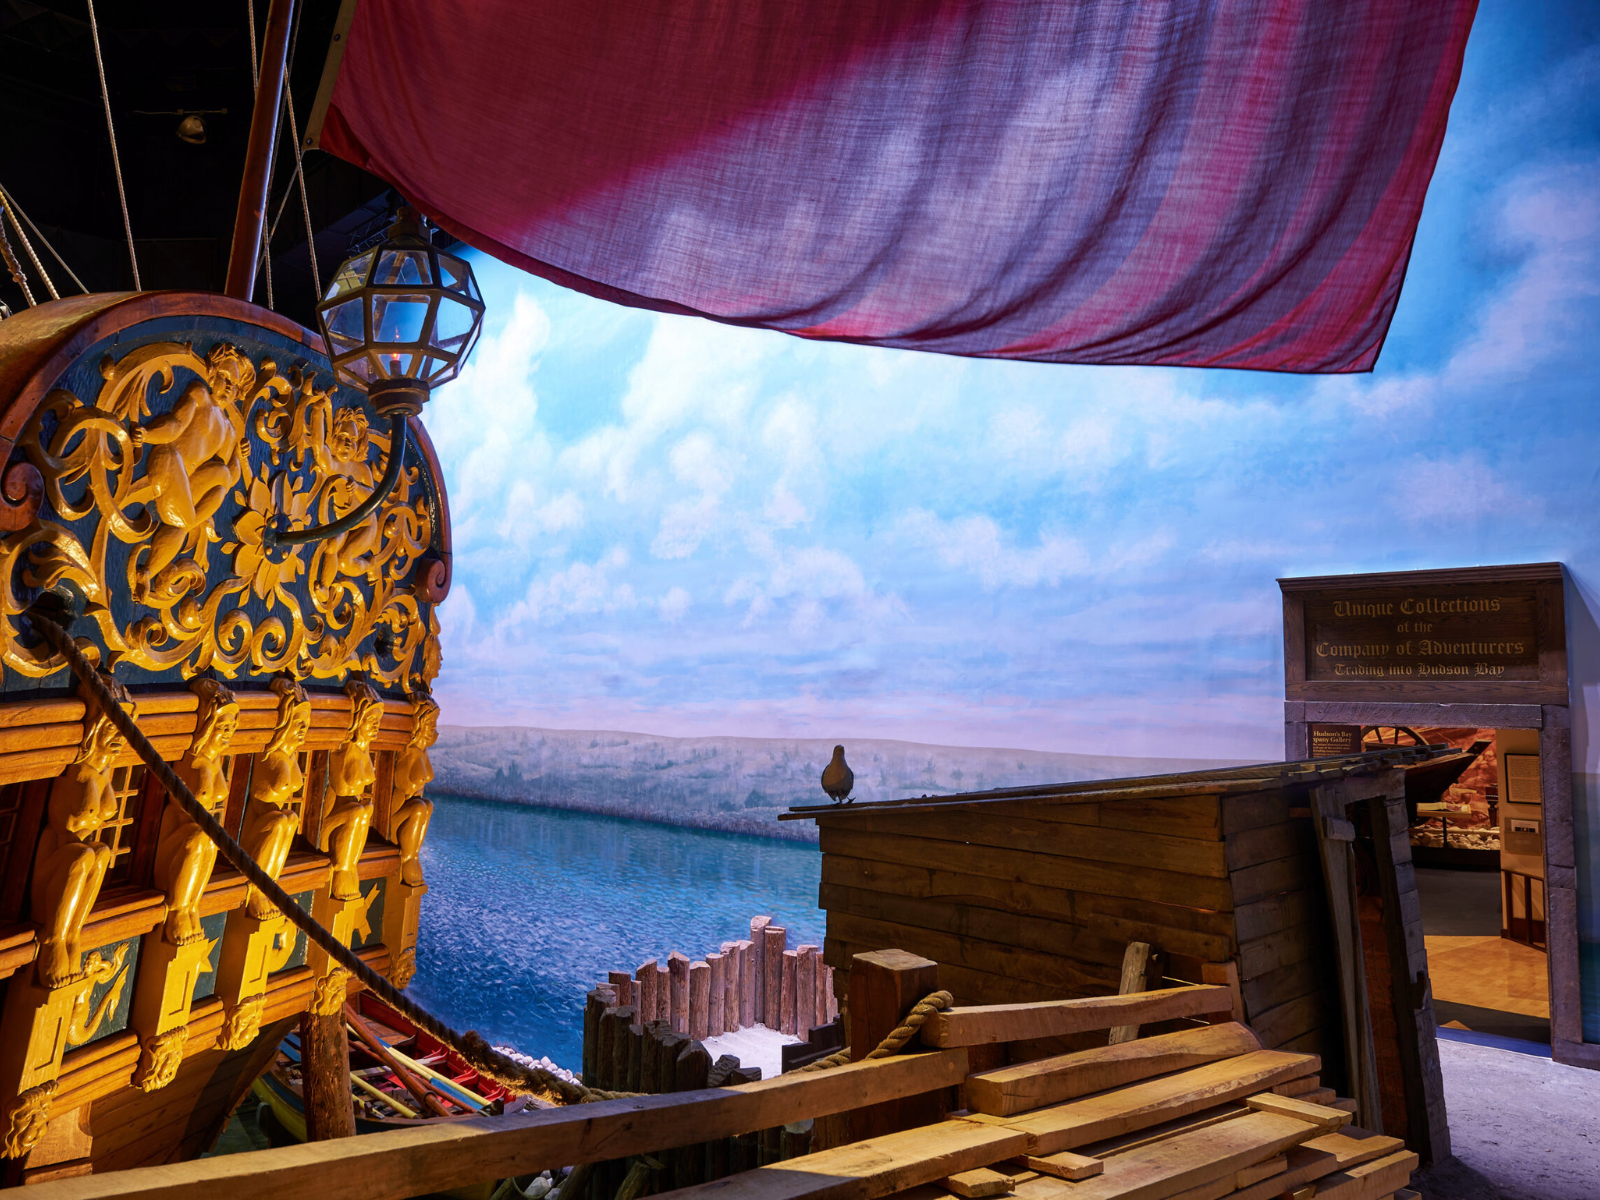 Photograph looking past the stern of a large wooden sip (the Nonsuch) toward a painted background mural showing blue water and a hilly coastline in the distance.